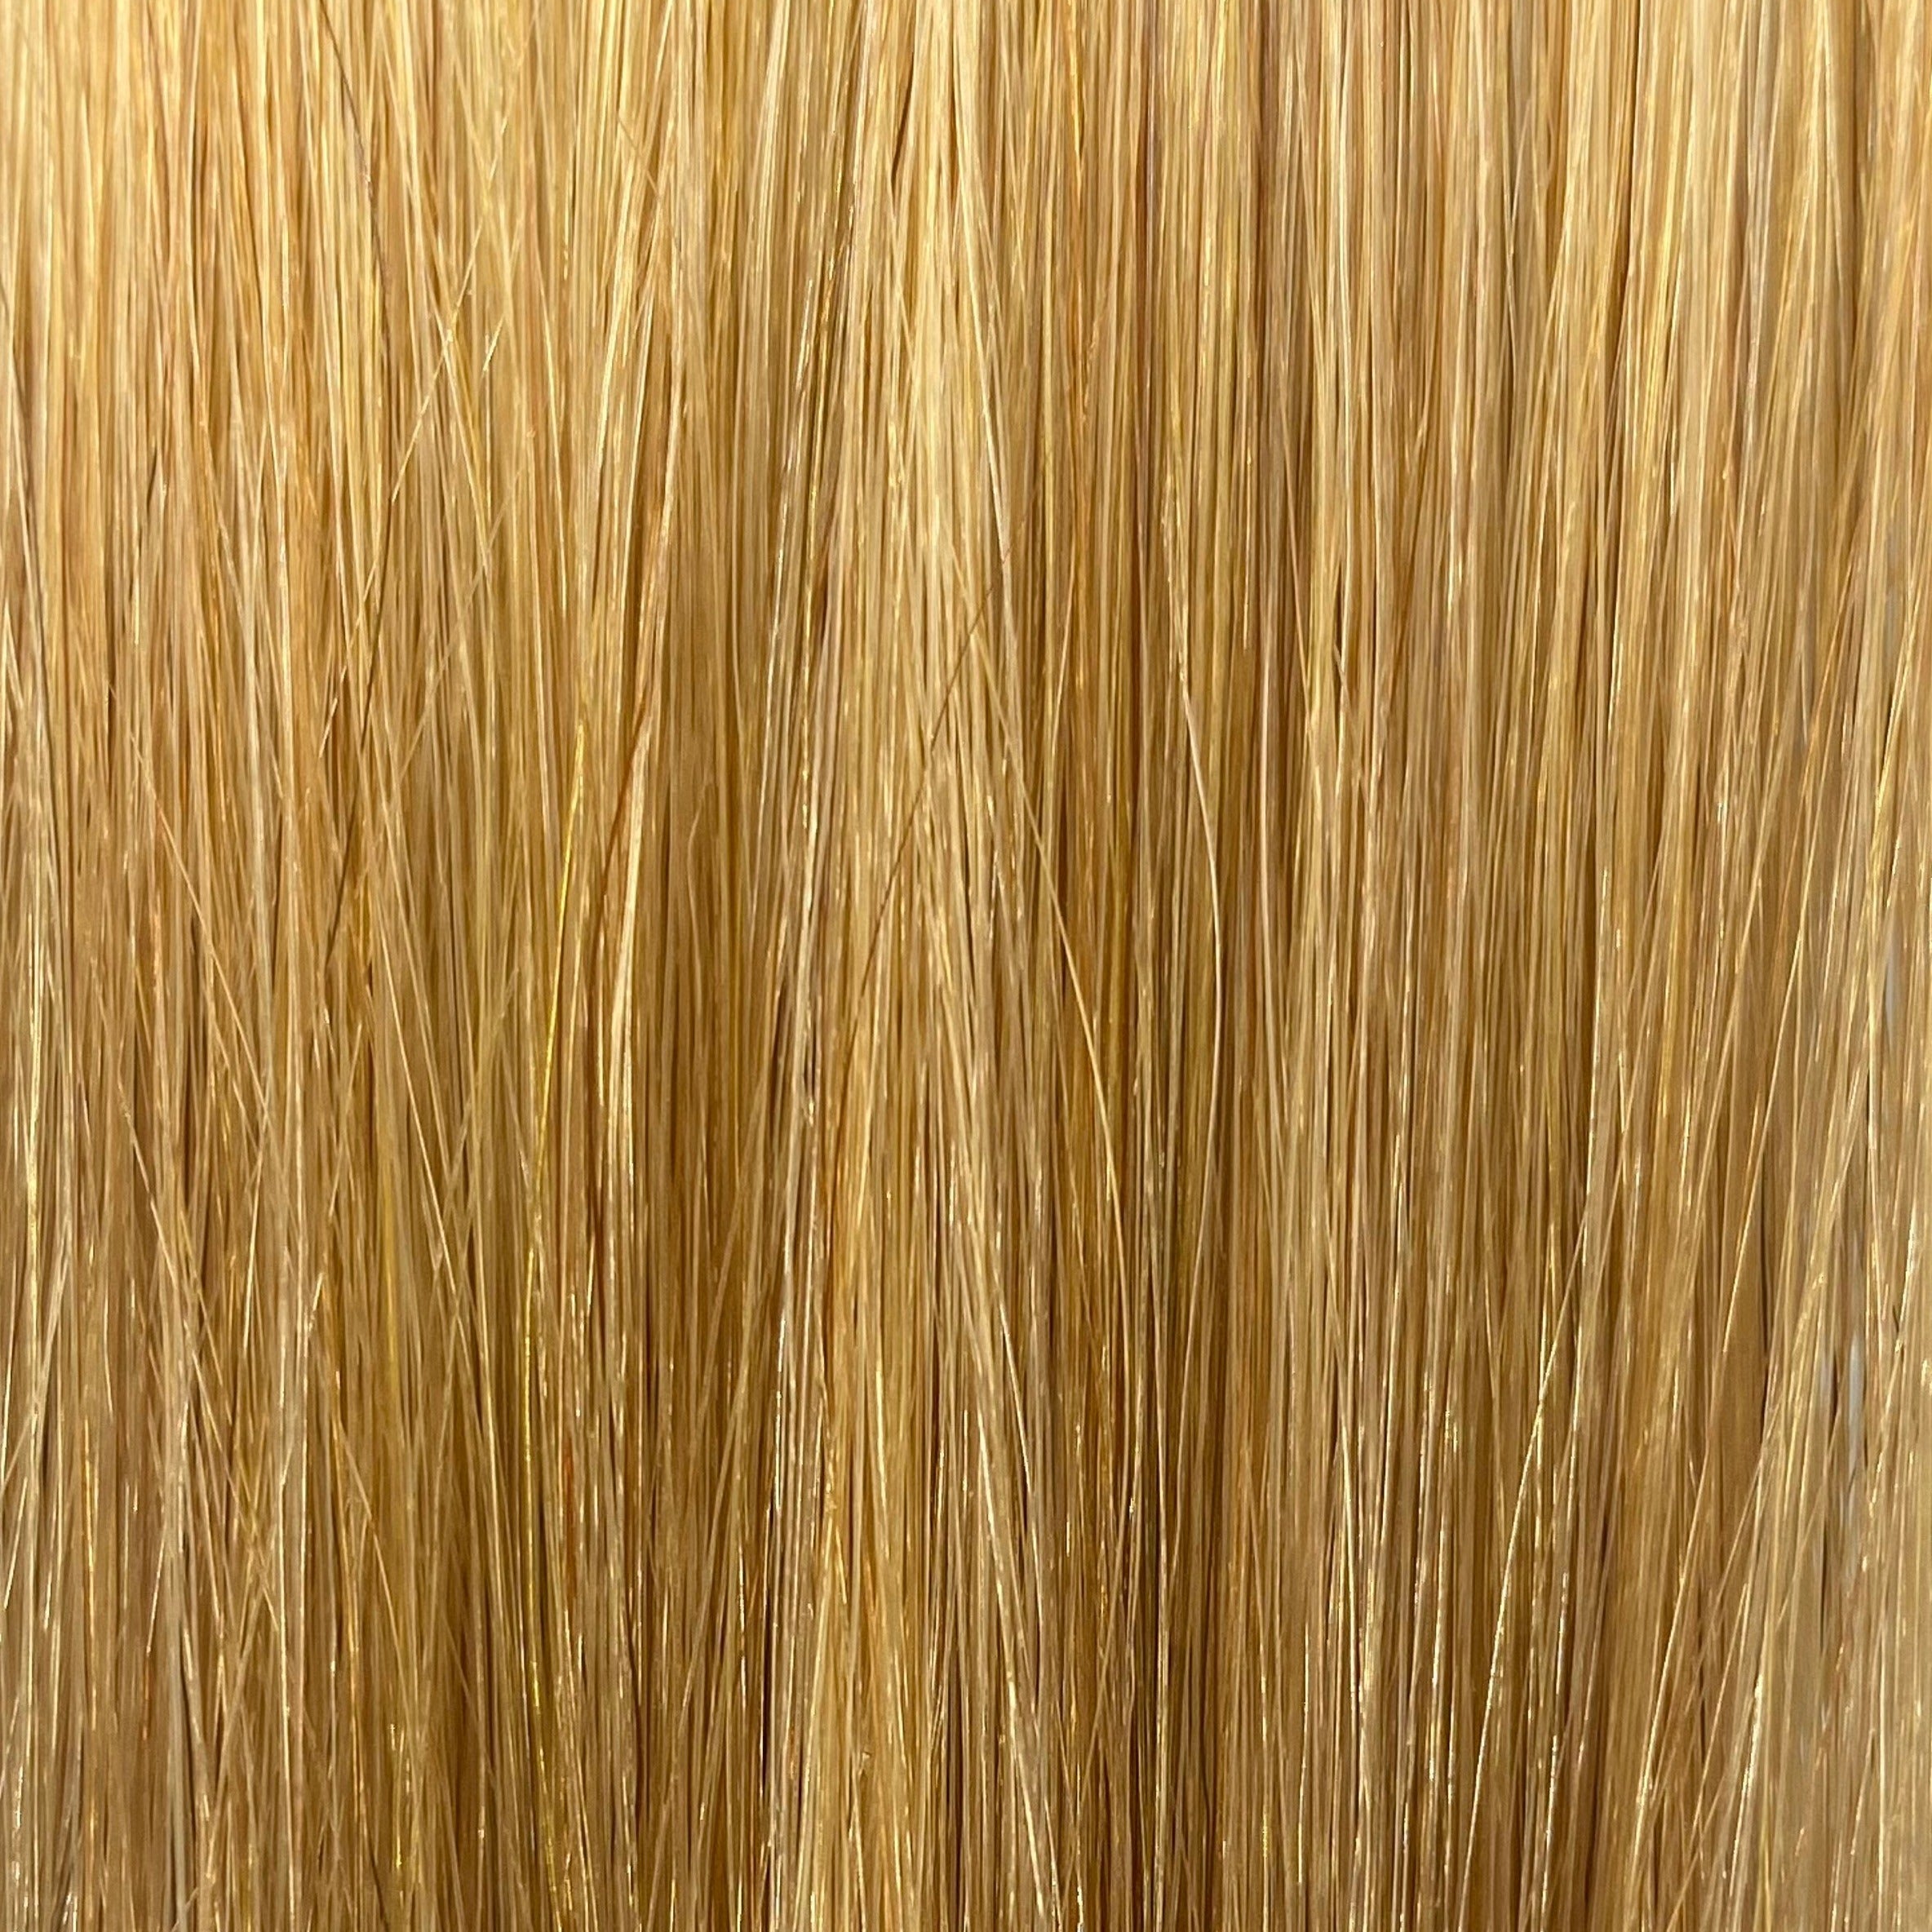 FUSION #DB3 GOLDEN BLONDE 40CM/ 16 INCHES  -  17.5 GRAMS